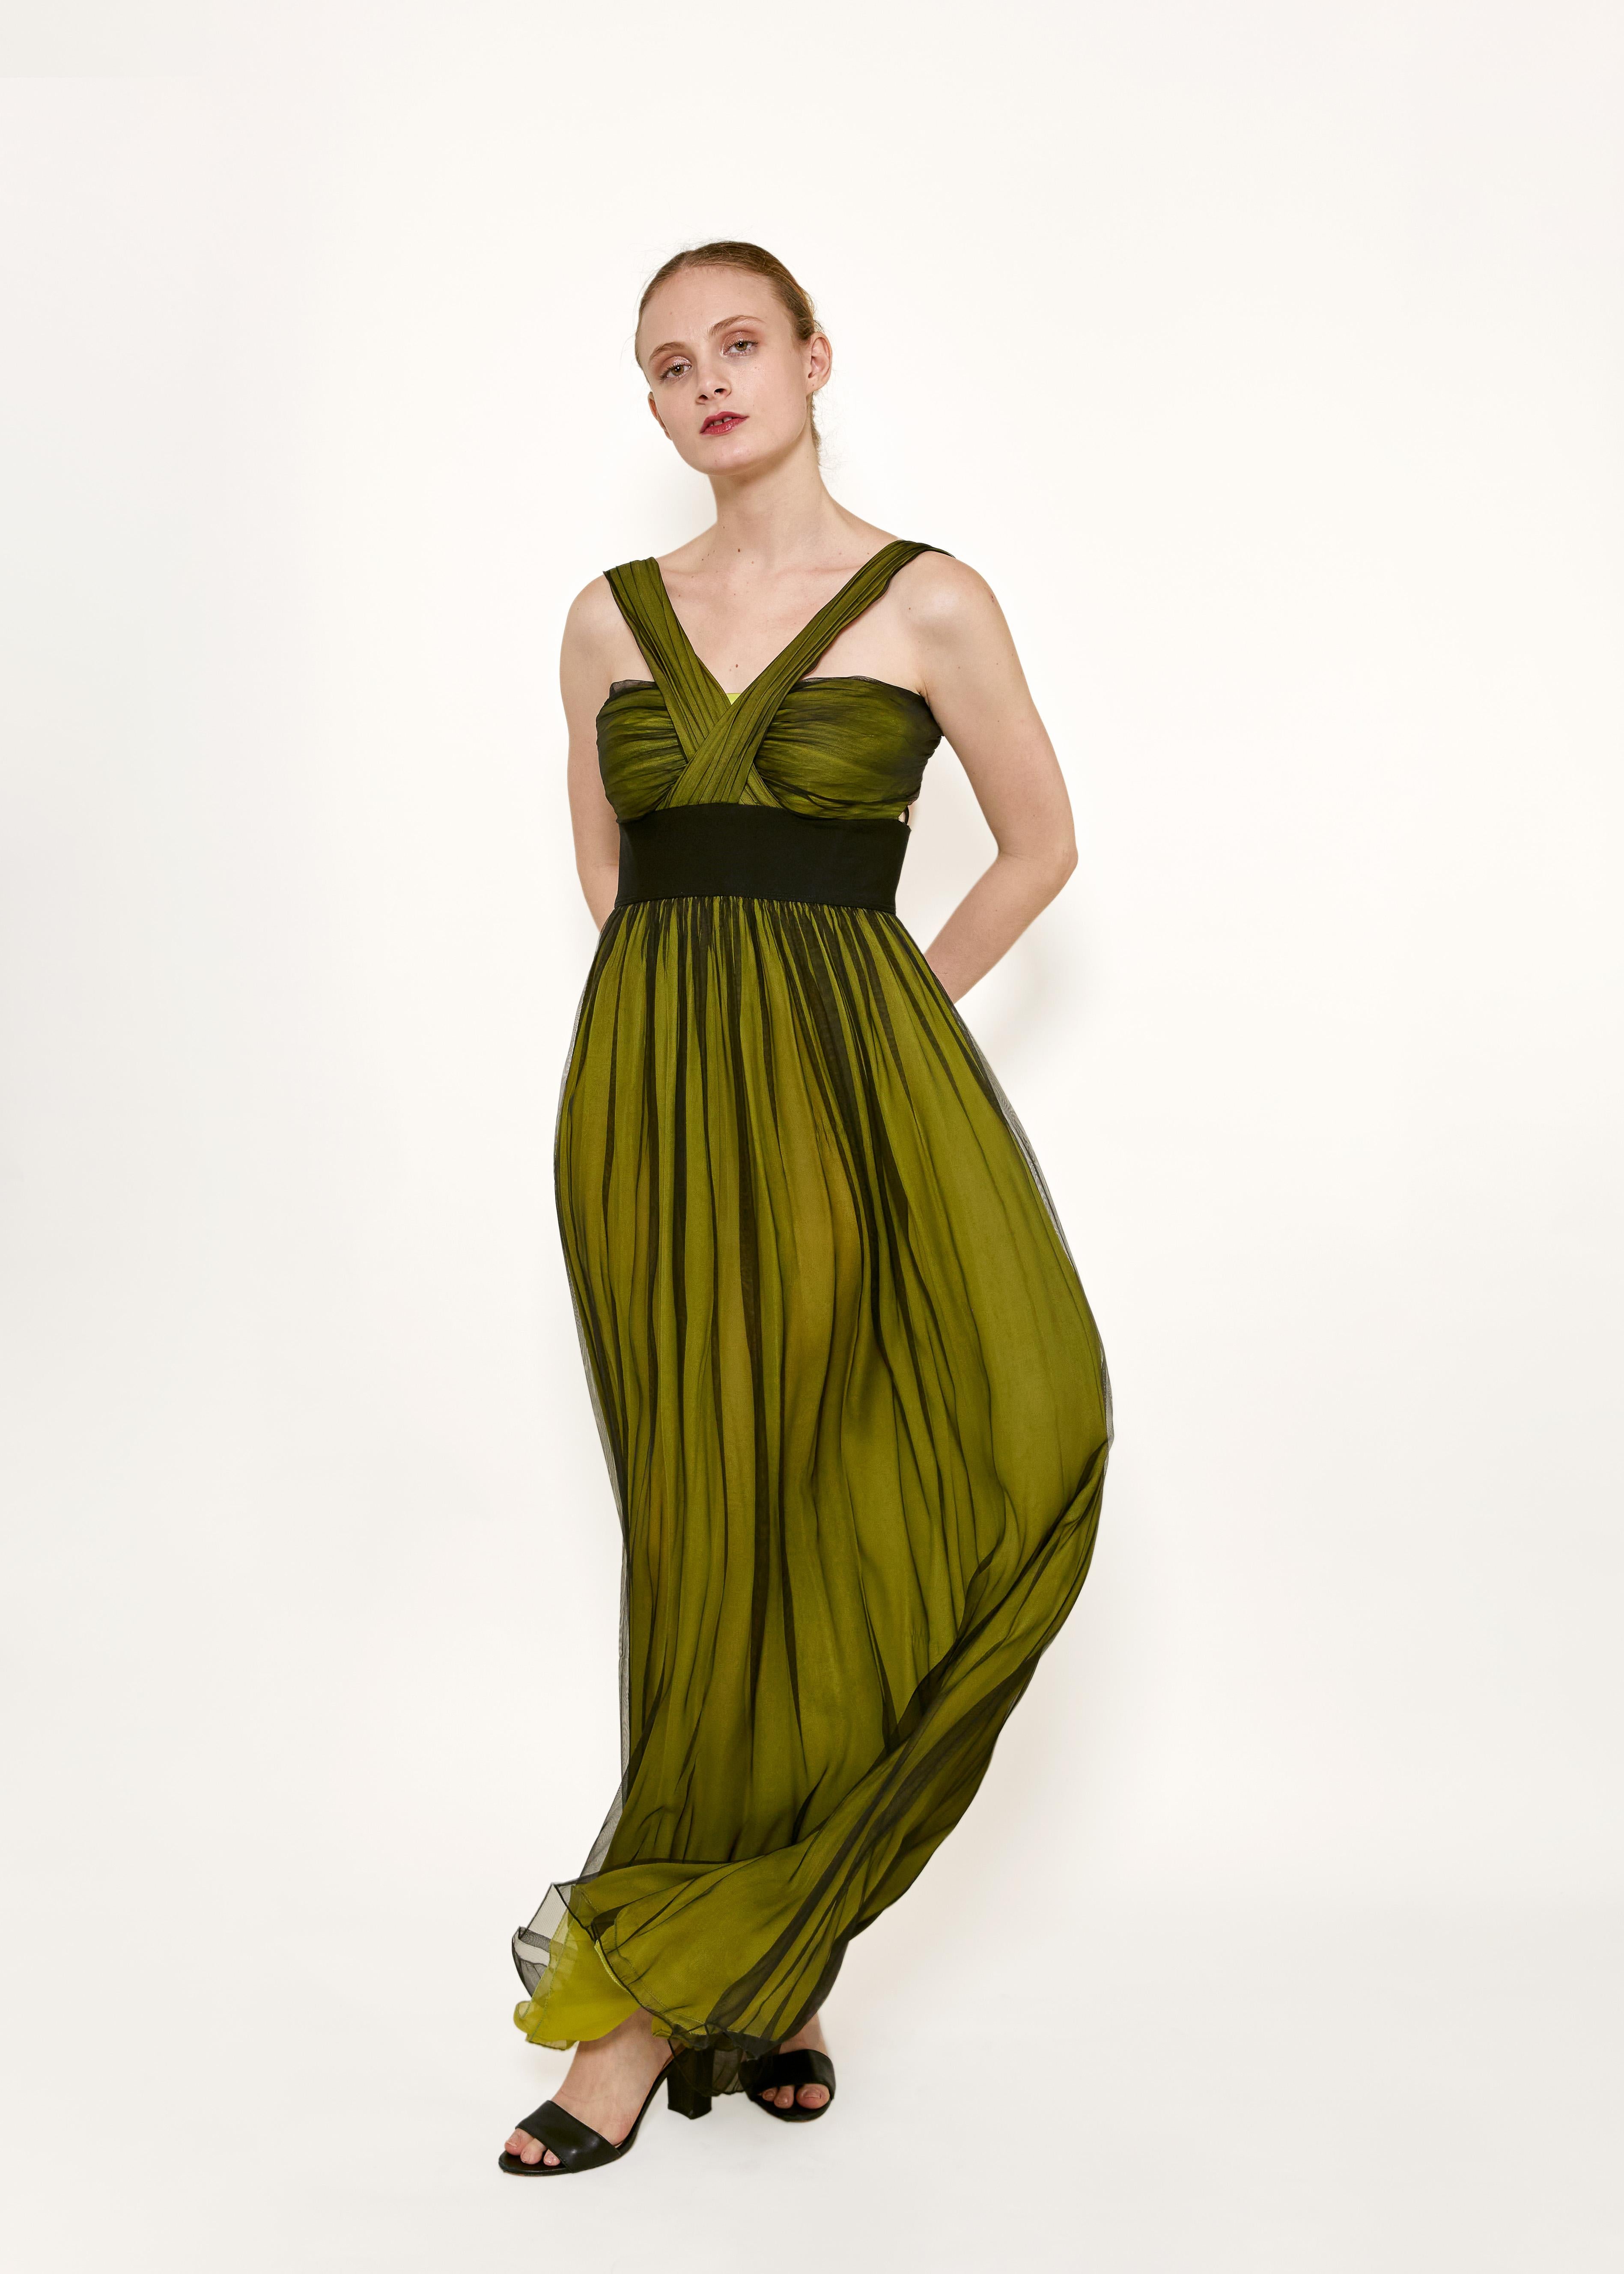 Elevate your evening look with this stunning Dolce & Gabbana Green/Black Cross-Front Chiffon Gown. Crafted from layered silk chiffon fabric, this gown exudes luxury and sophistication. The unique cross-front design adds a touch of elegance, making